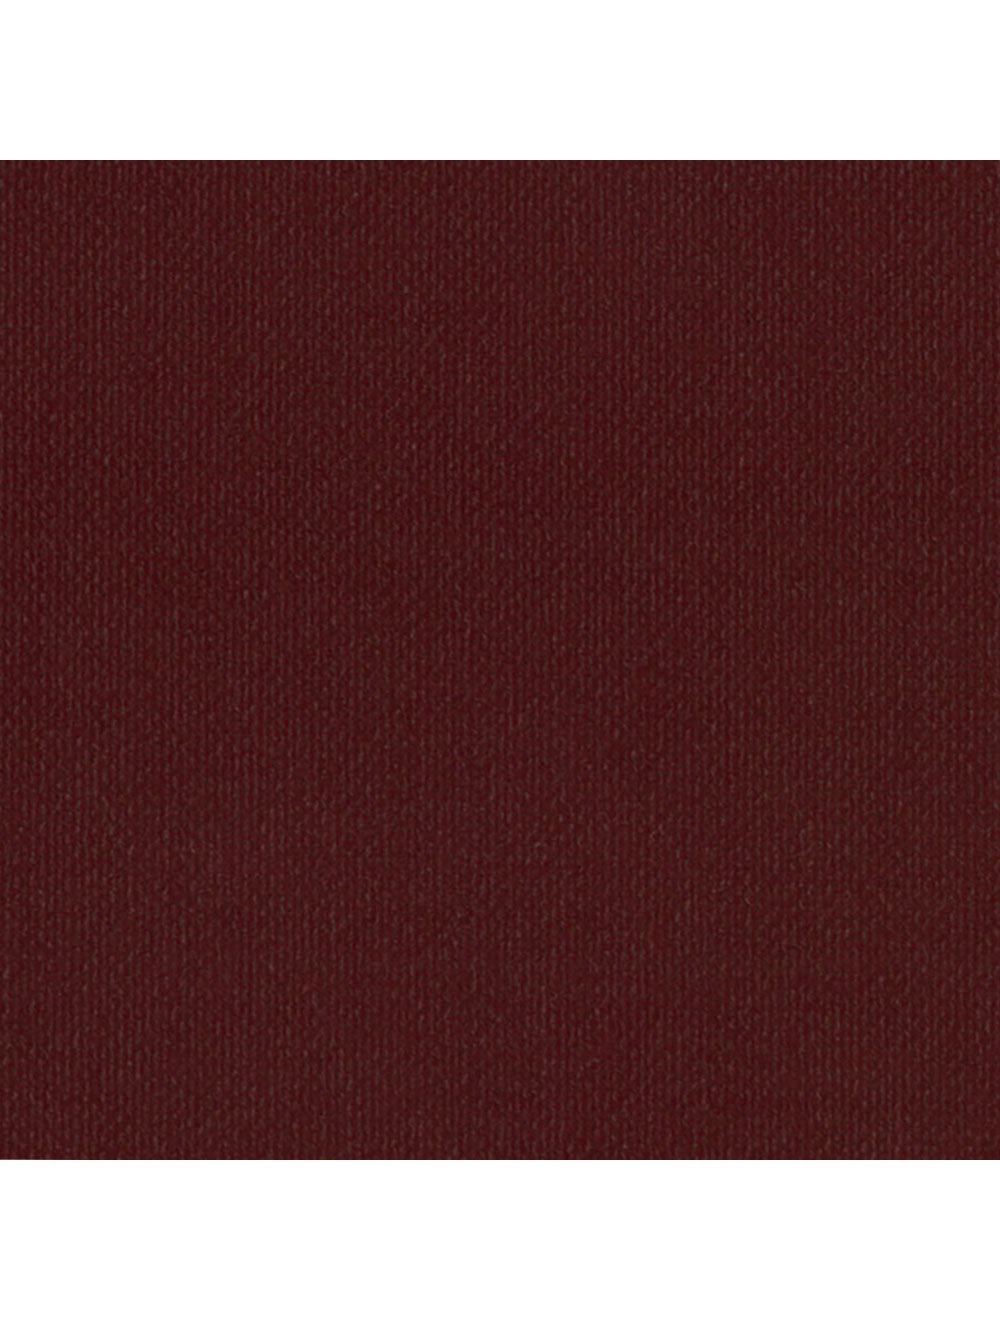 London Mulberry Material Swatch